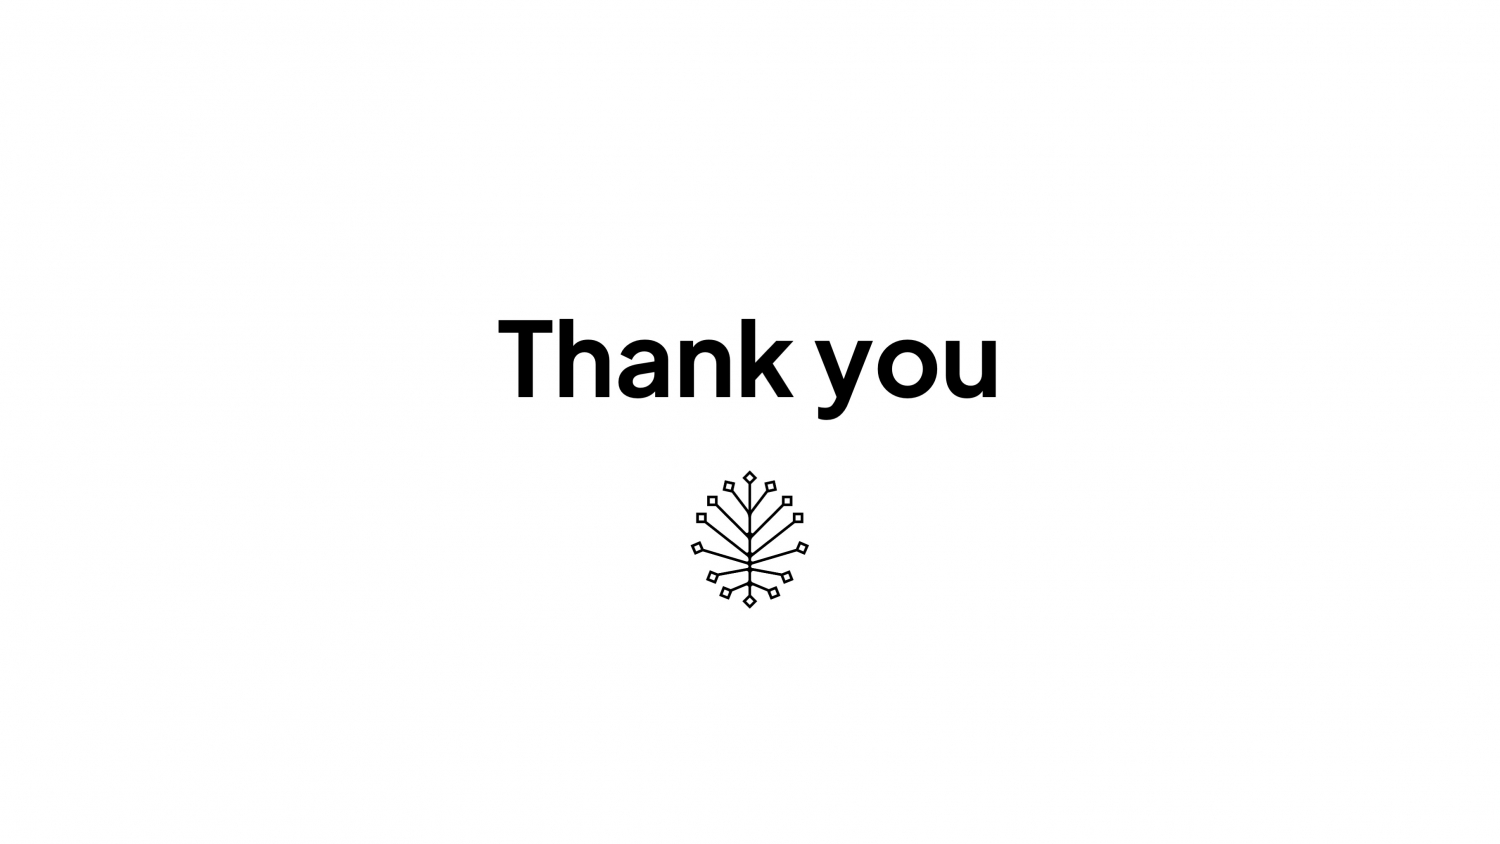 The end slide follows Leanne's brand: minimalist modern layout, plenty of white space, clean typography and putting people first with 'thank you'.